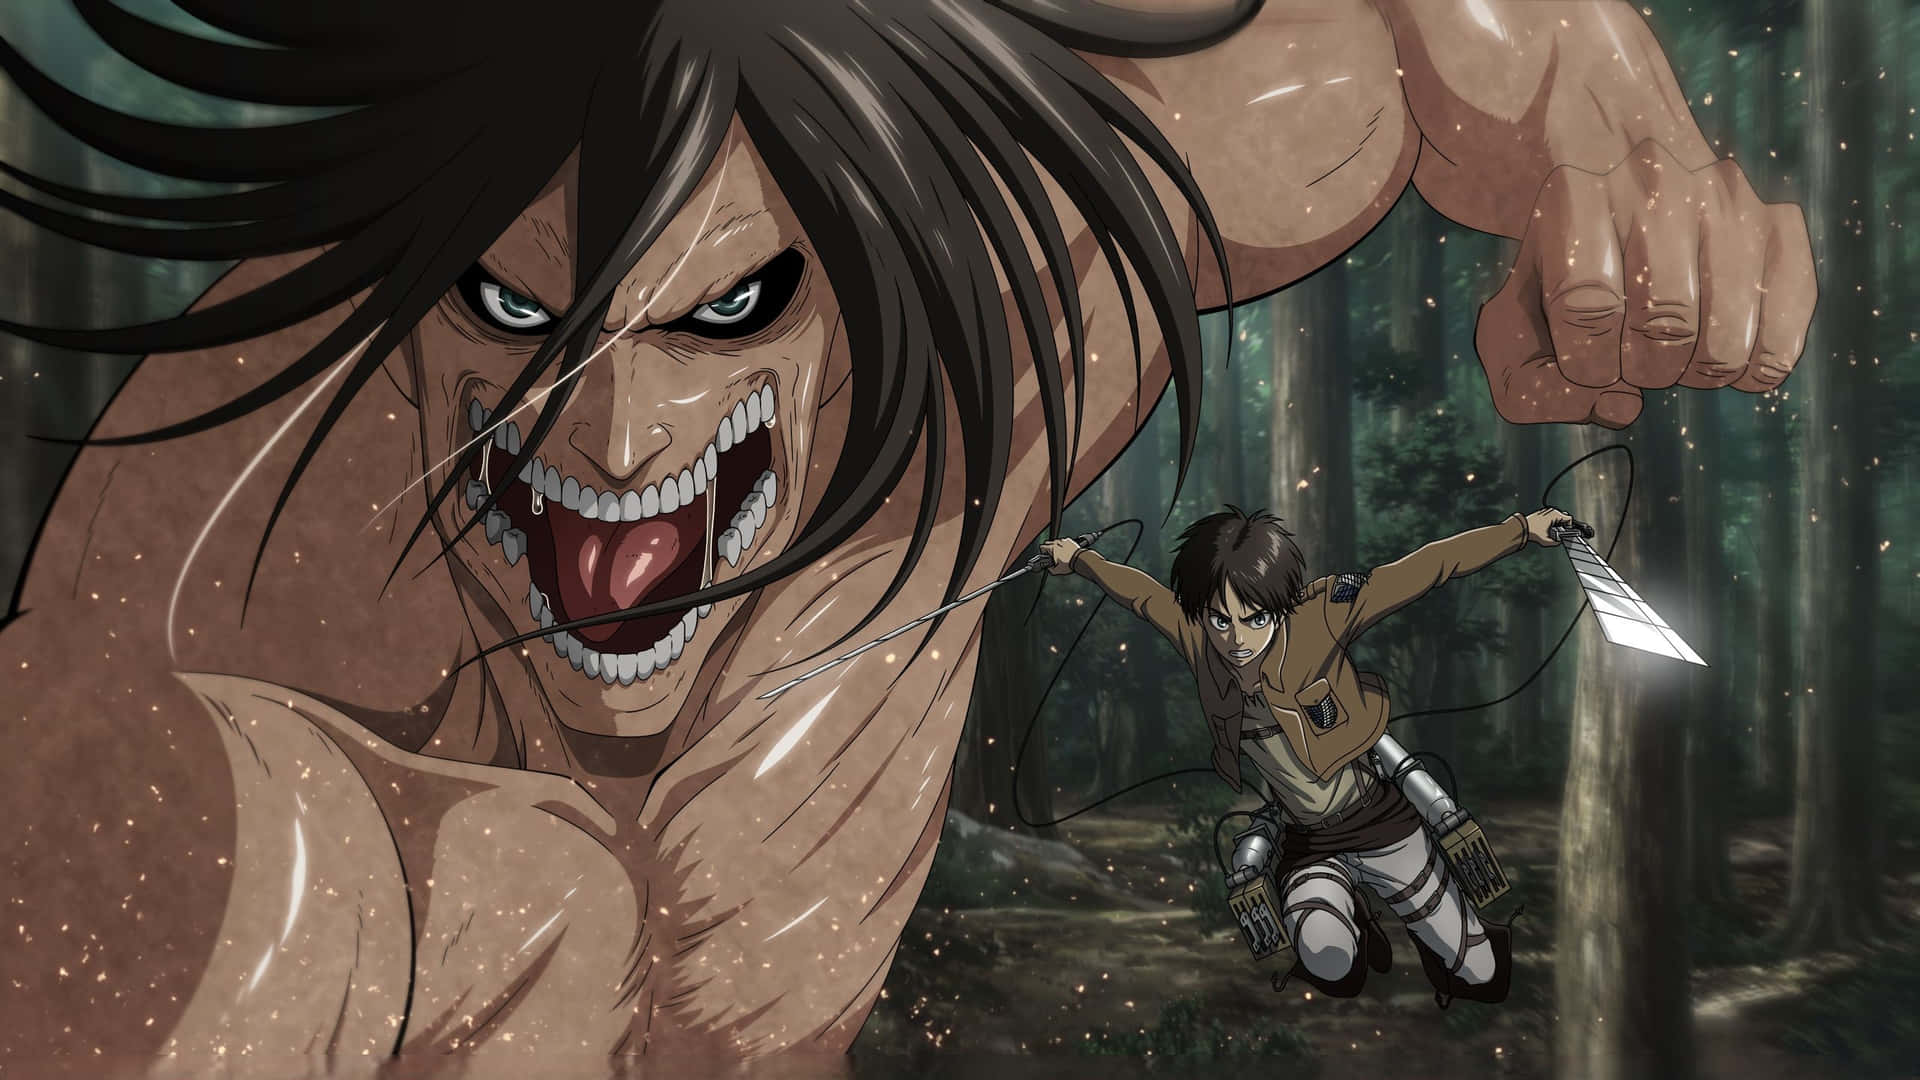 "The struggle to survive never ends in Attack On Titan"